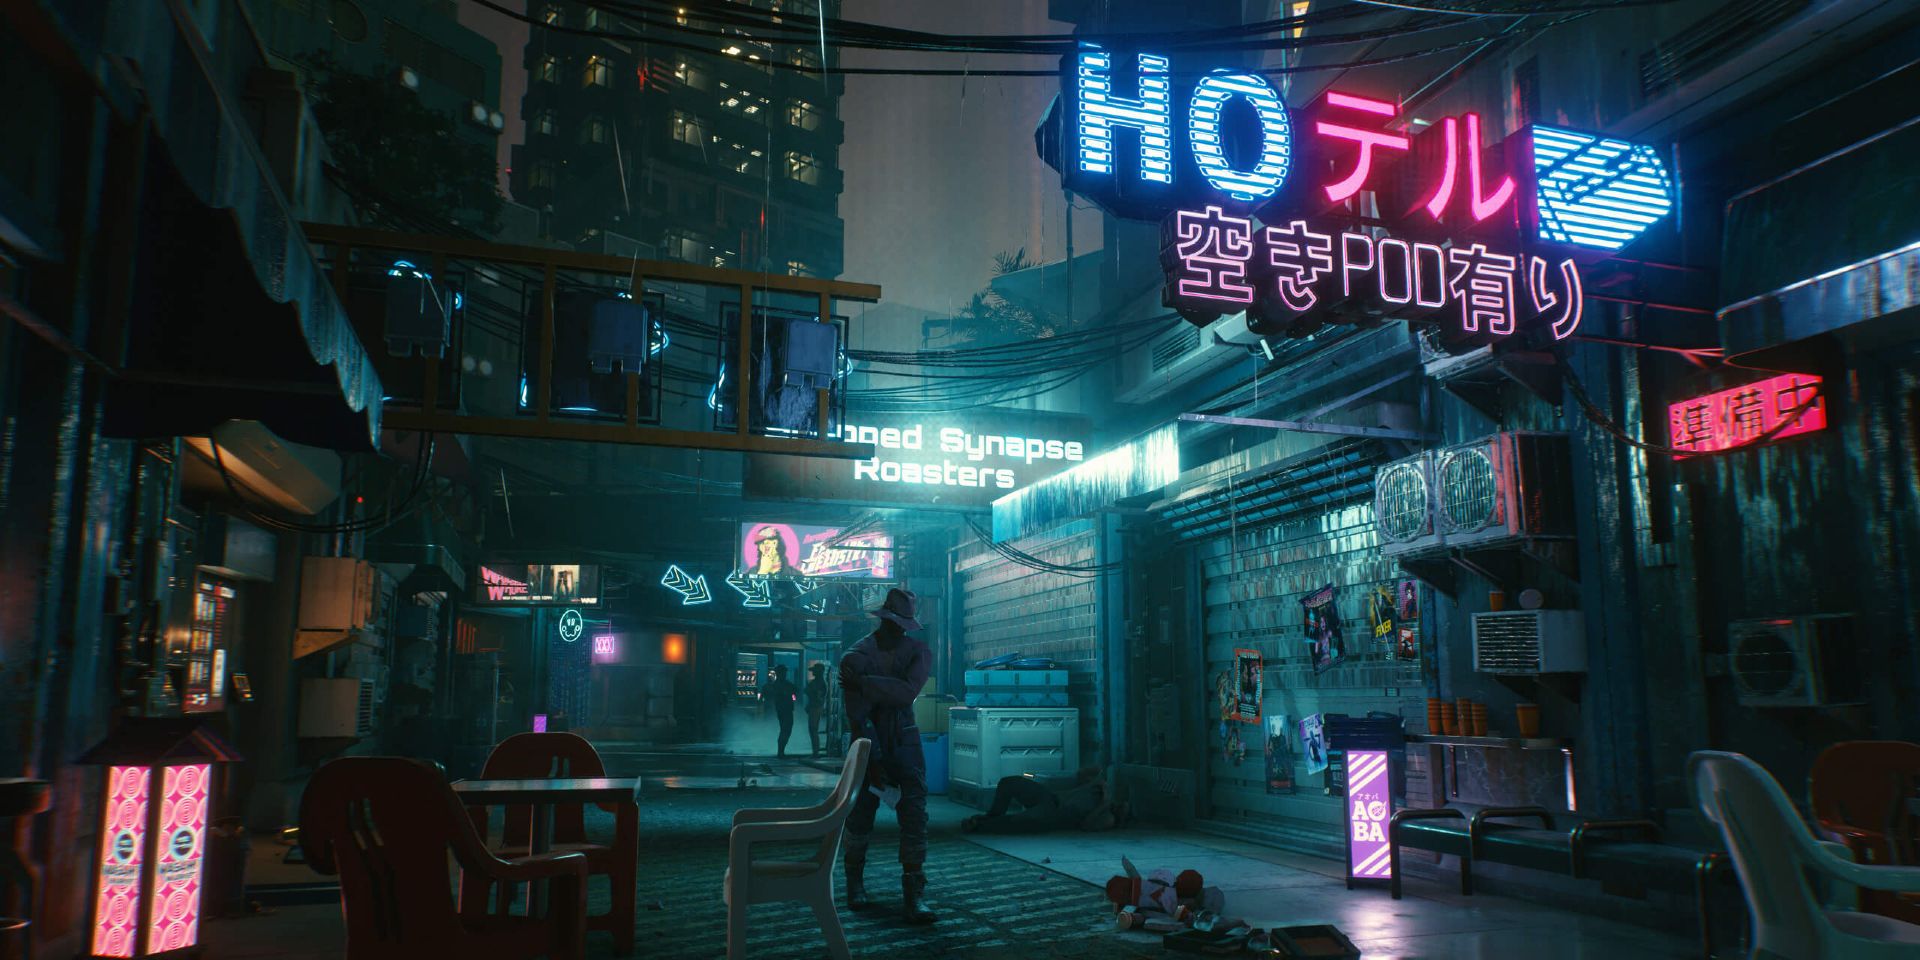 A screenshot of Night City from the video game Cyberpunk 2077.